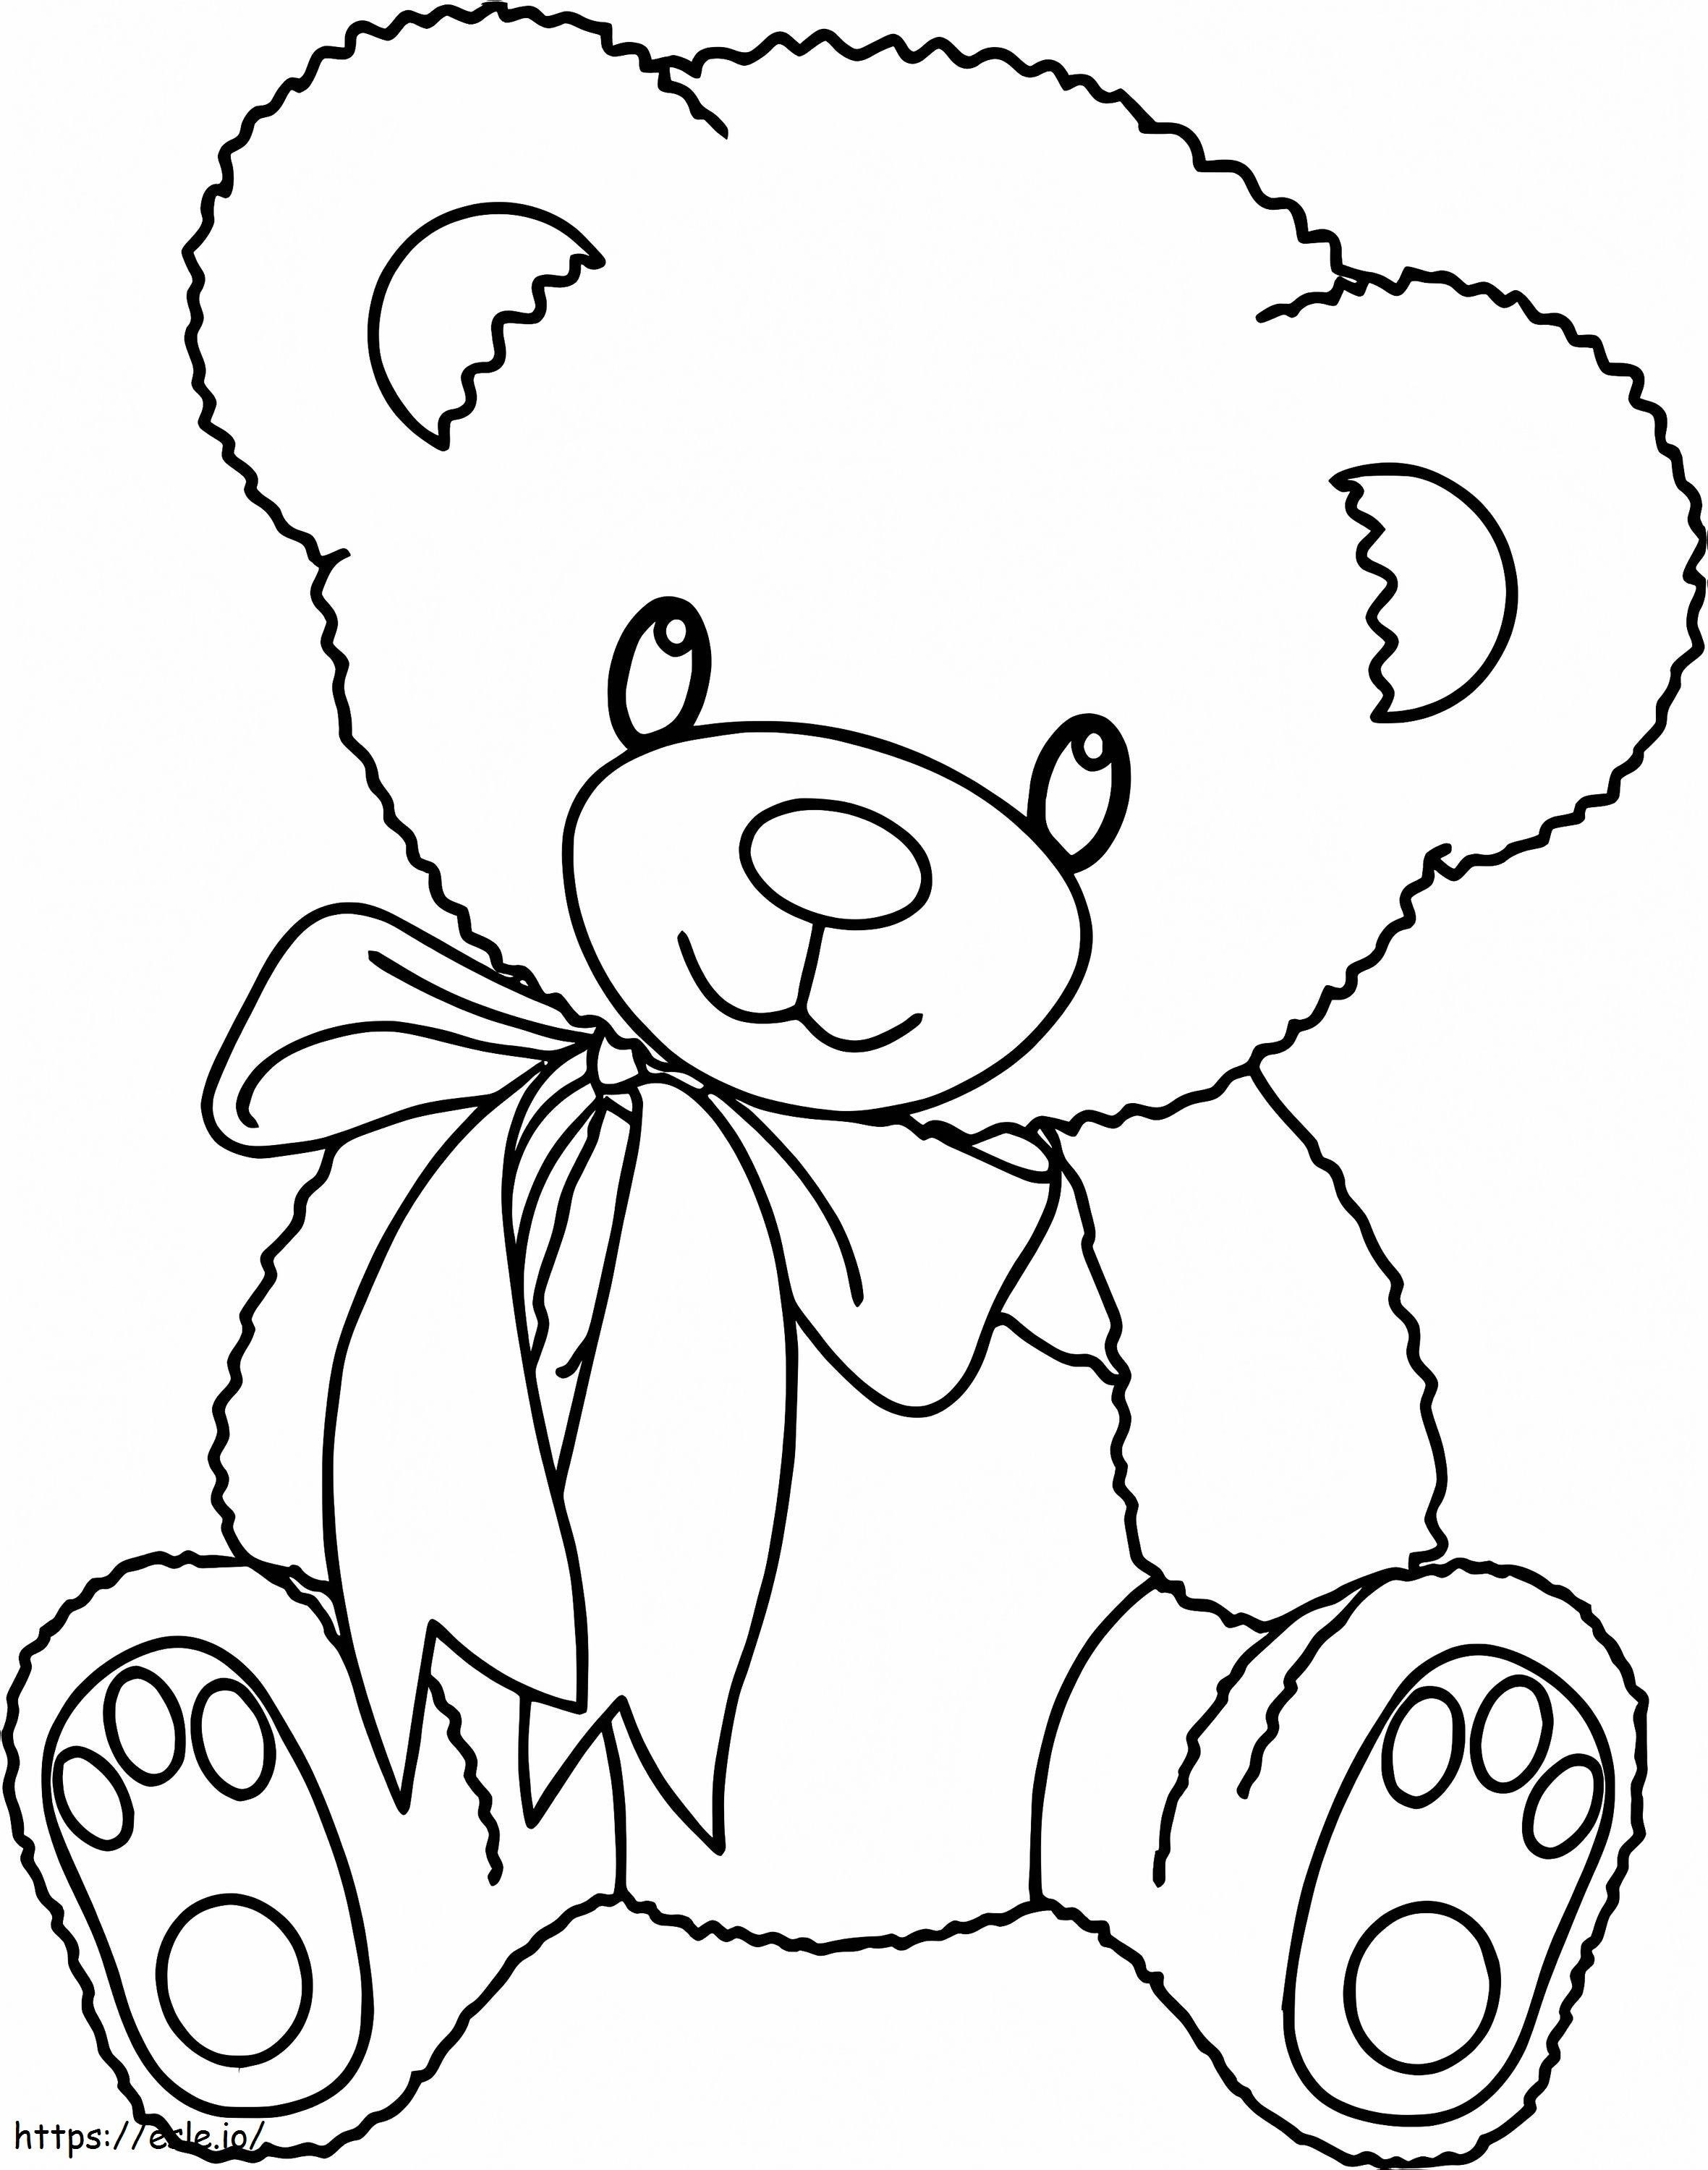 Adorable Teddy Bear coloring page